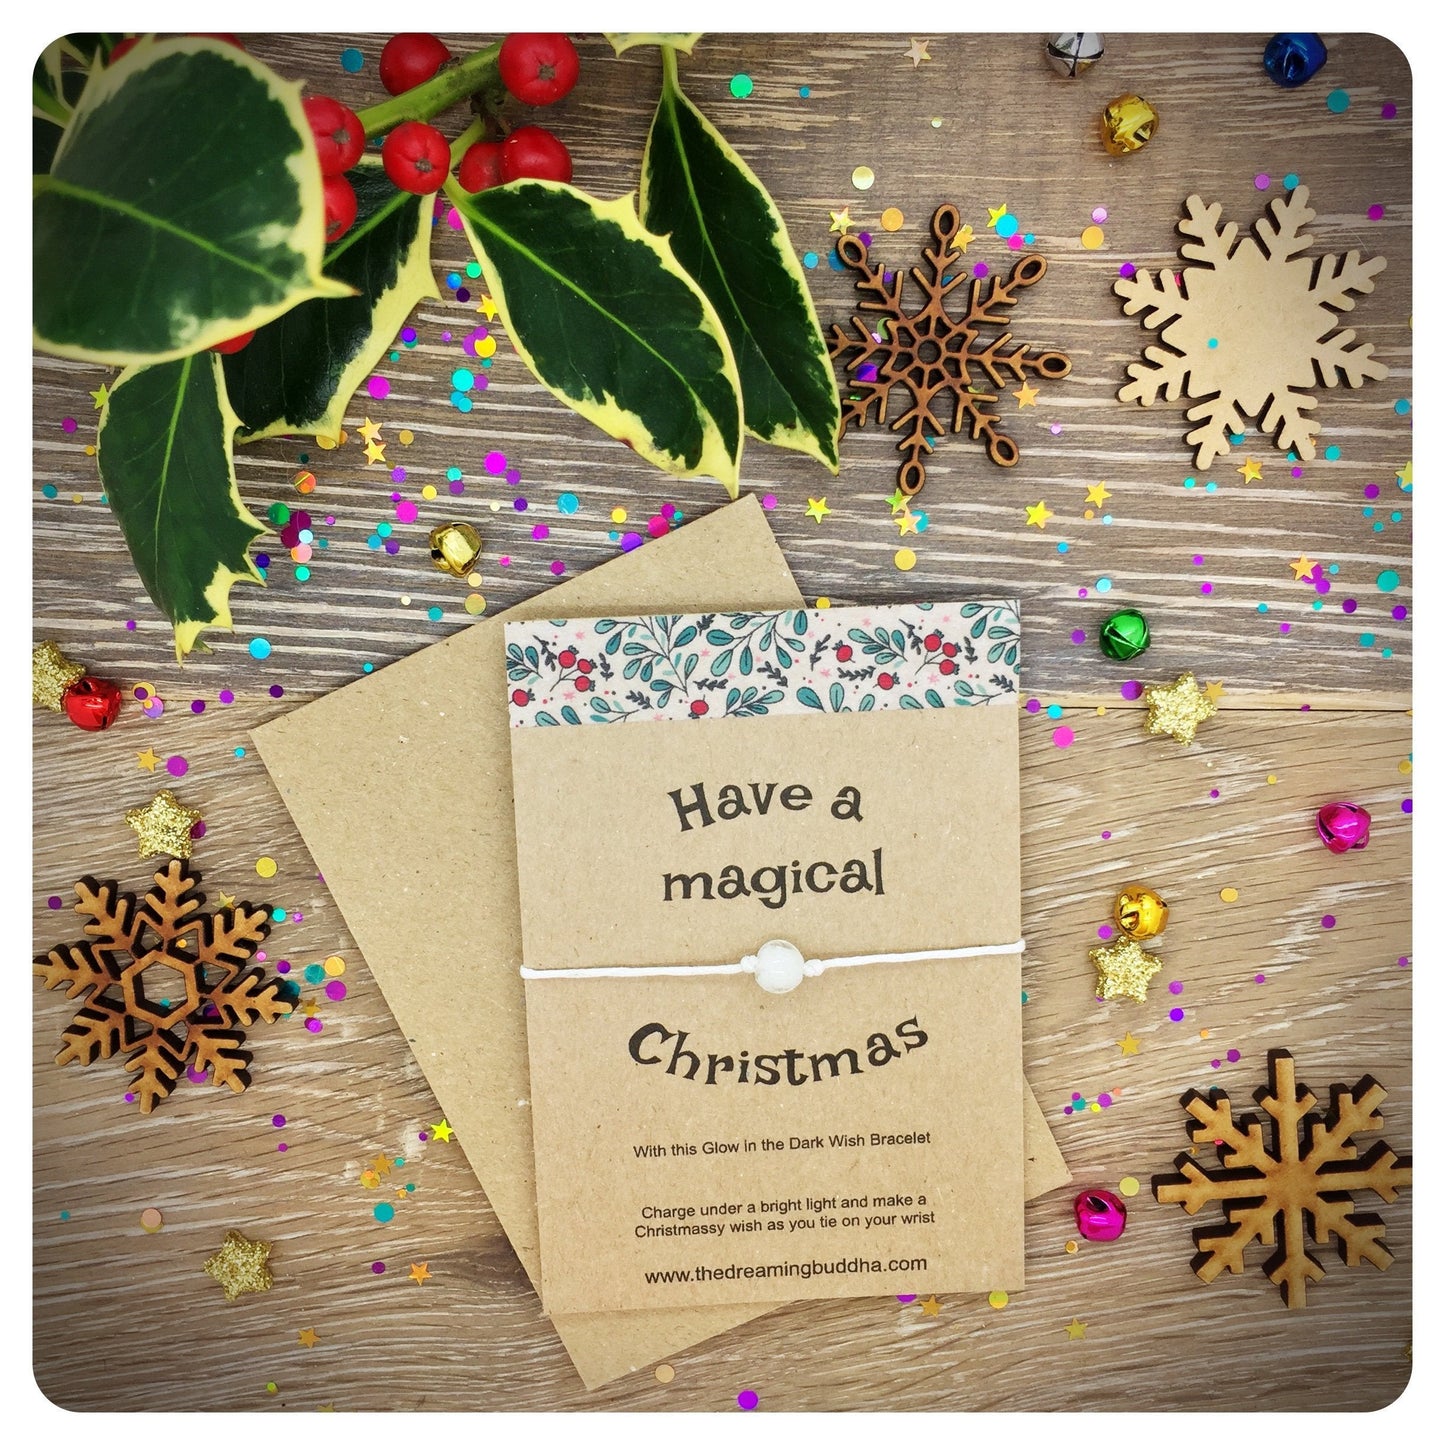 Magical Christmas Wish, Unique Xmas Cards, Stocking Filler Christmas Gift, Unusual Secret Santa Gift, Glow In The Dark Christmas Bracelet